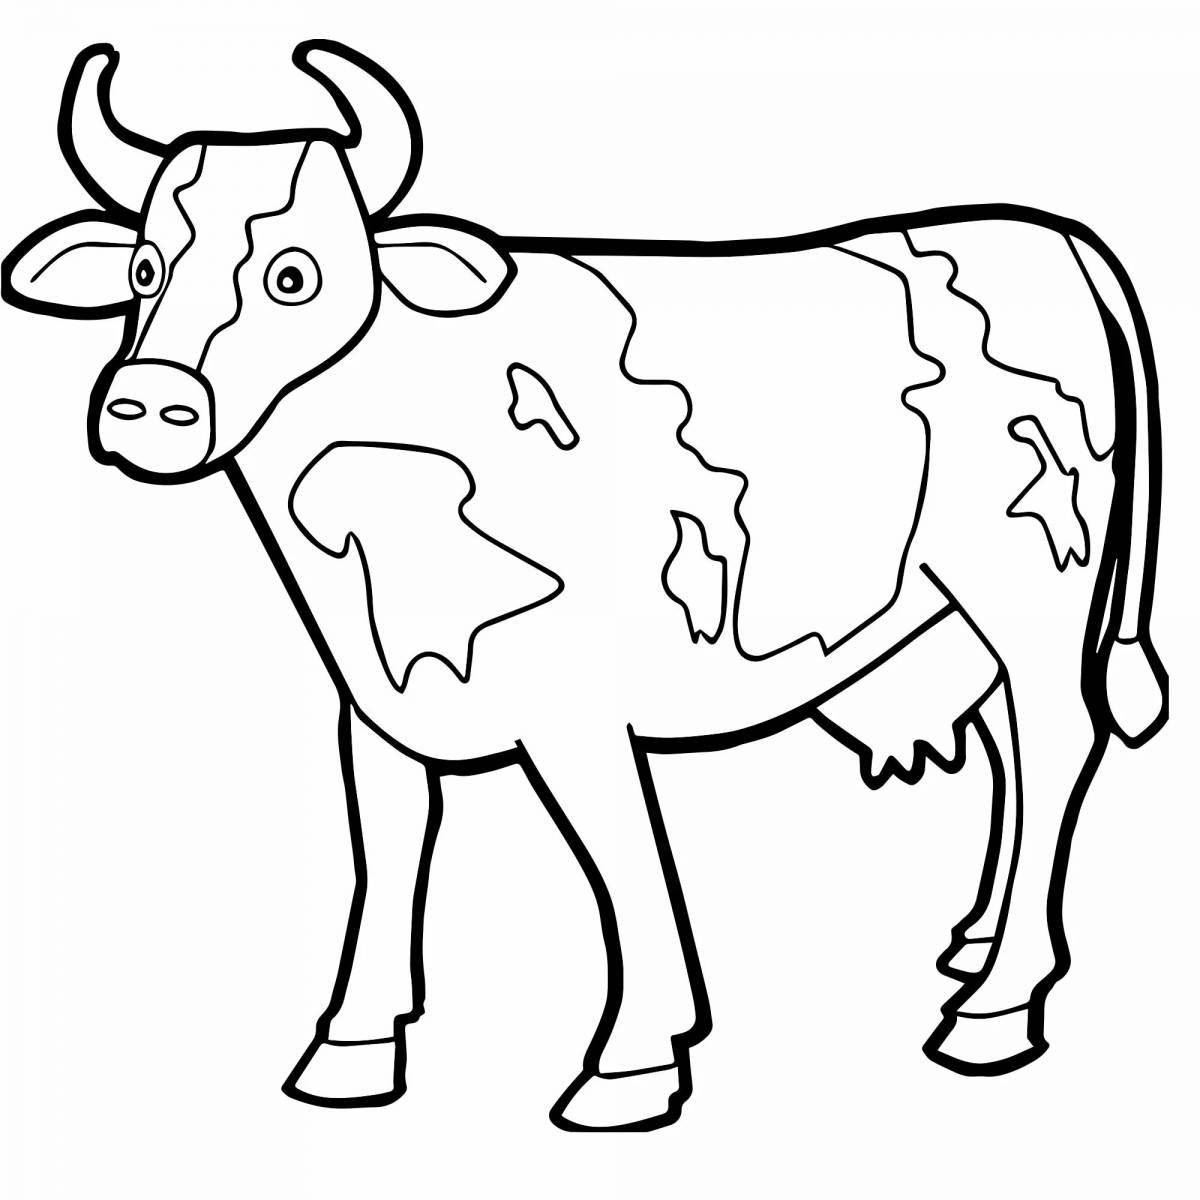 Cow for kids #10